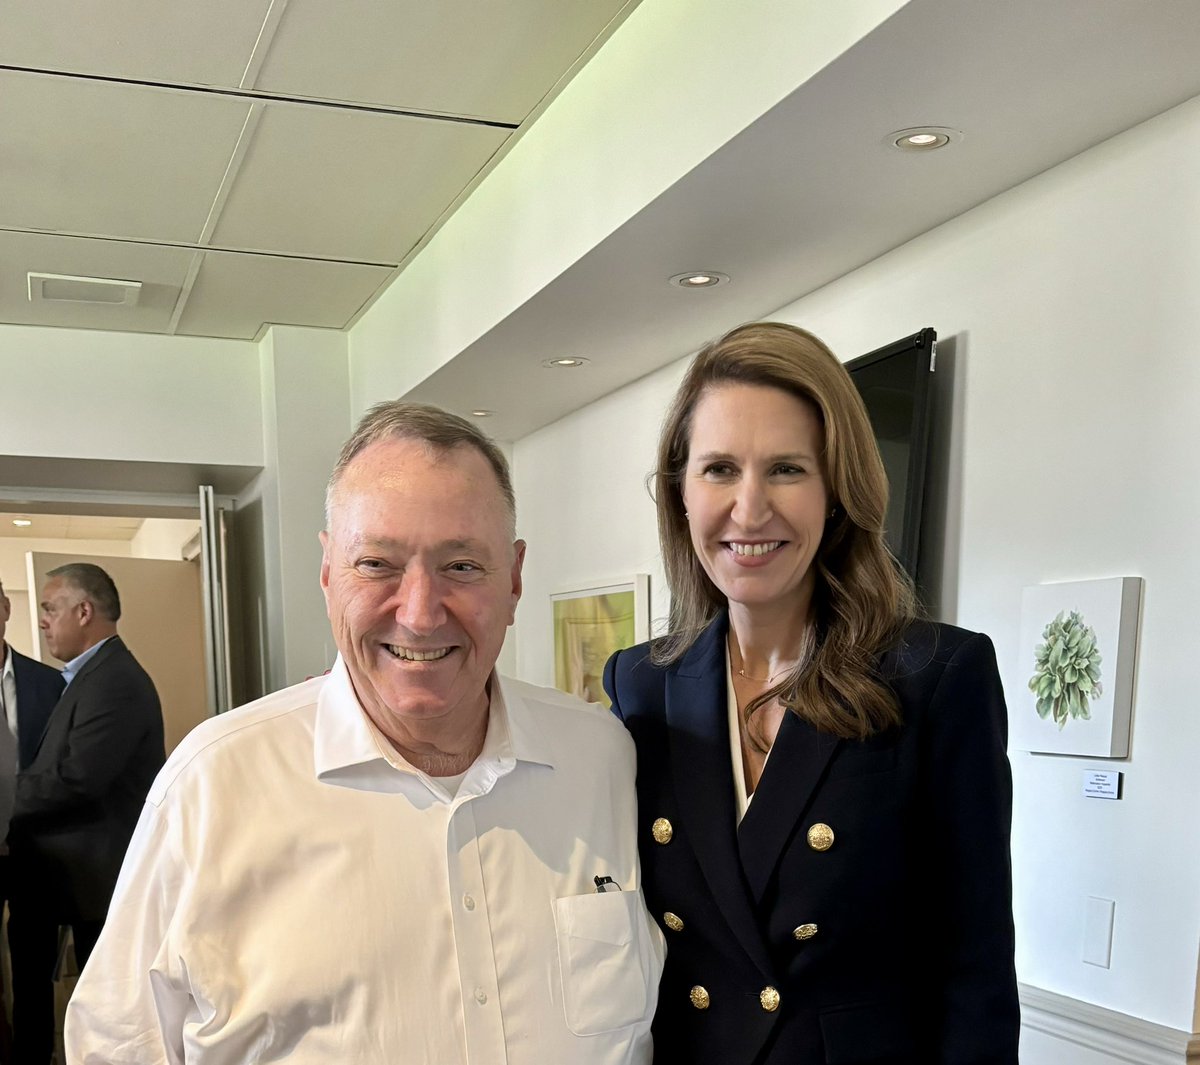 Always a pleasure to Meet with Caroline Mulroney Ontario's President of the Treasury Board. The Minister took time to meet with our members and hear their concerns about how long it takes to get a quarry or Pitt licenced...between 7-12 years and up to $20 million in costs.